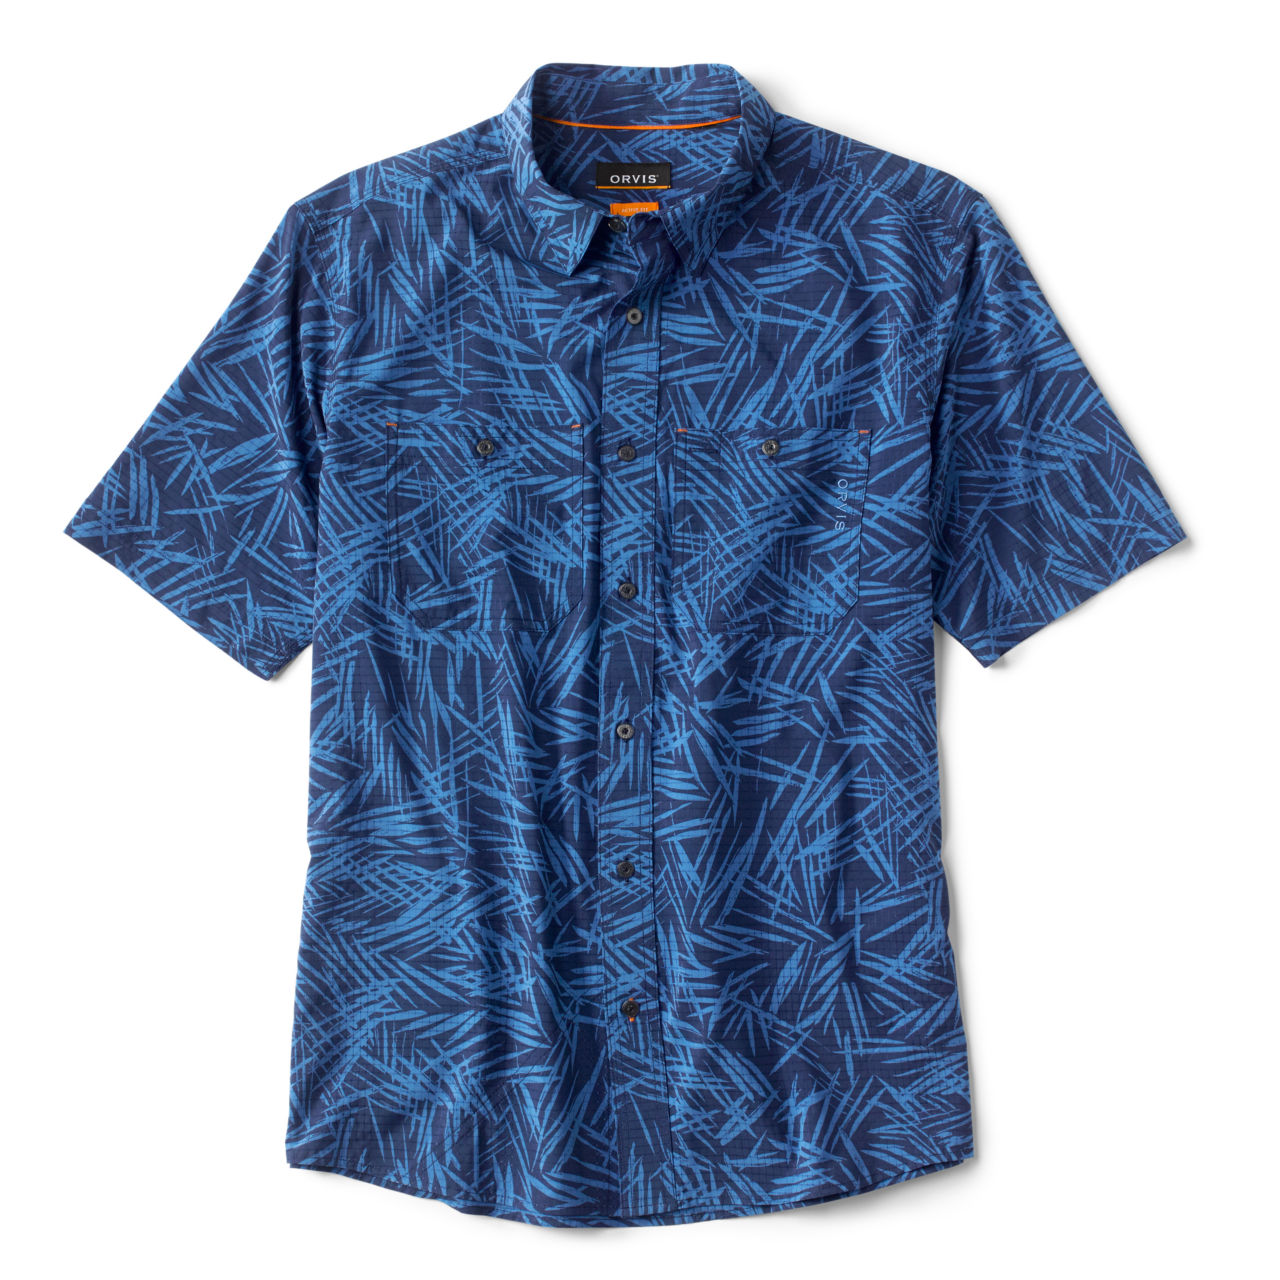 Tropic Tech Printed Short-Sleeved Shirt - BLUE image number 0